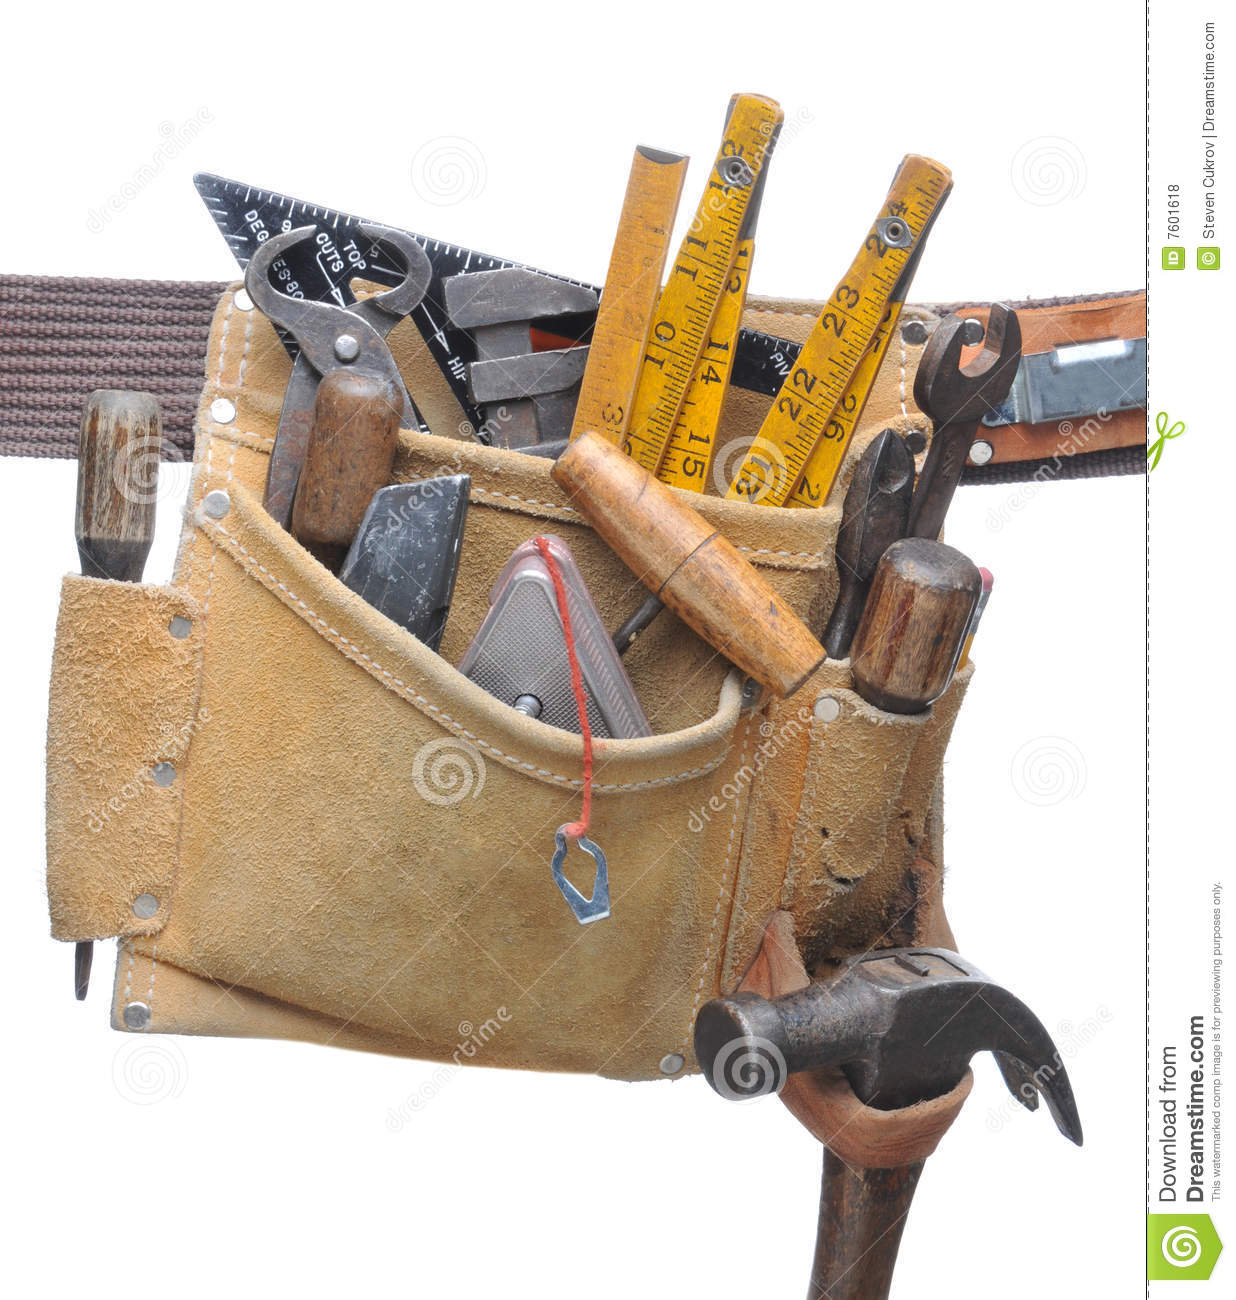 Tool Belt Stuffed With Assorted Hand Tools Isolated Over White